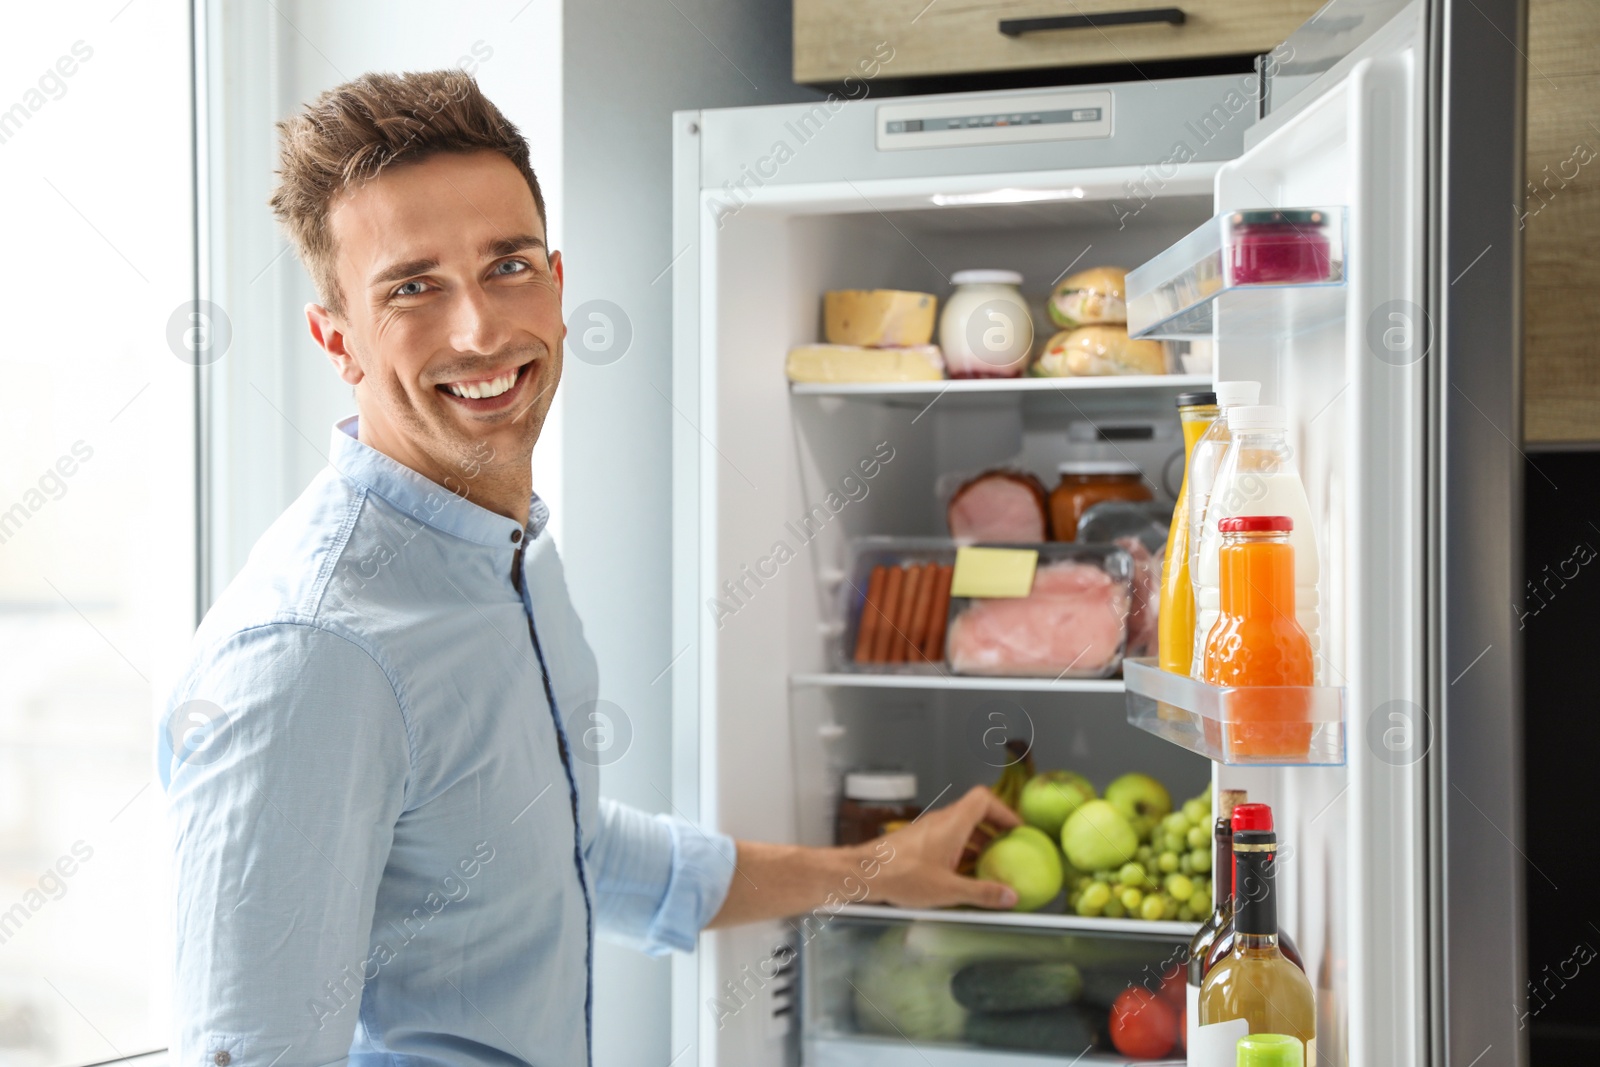 Photo of Man taking apple out of refrigerator in kitchen